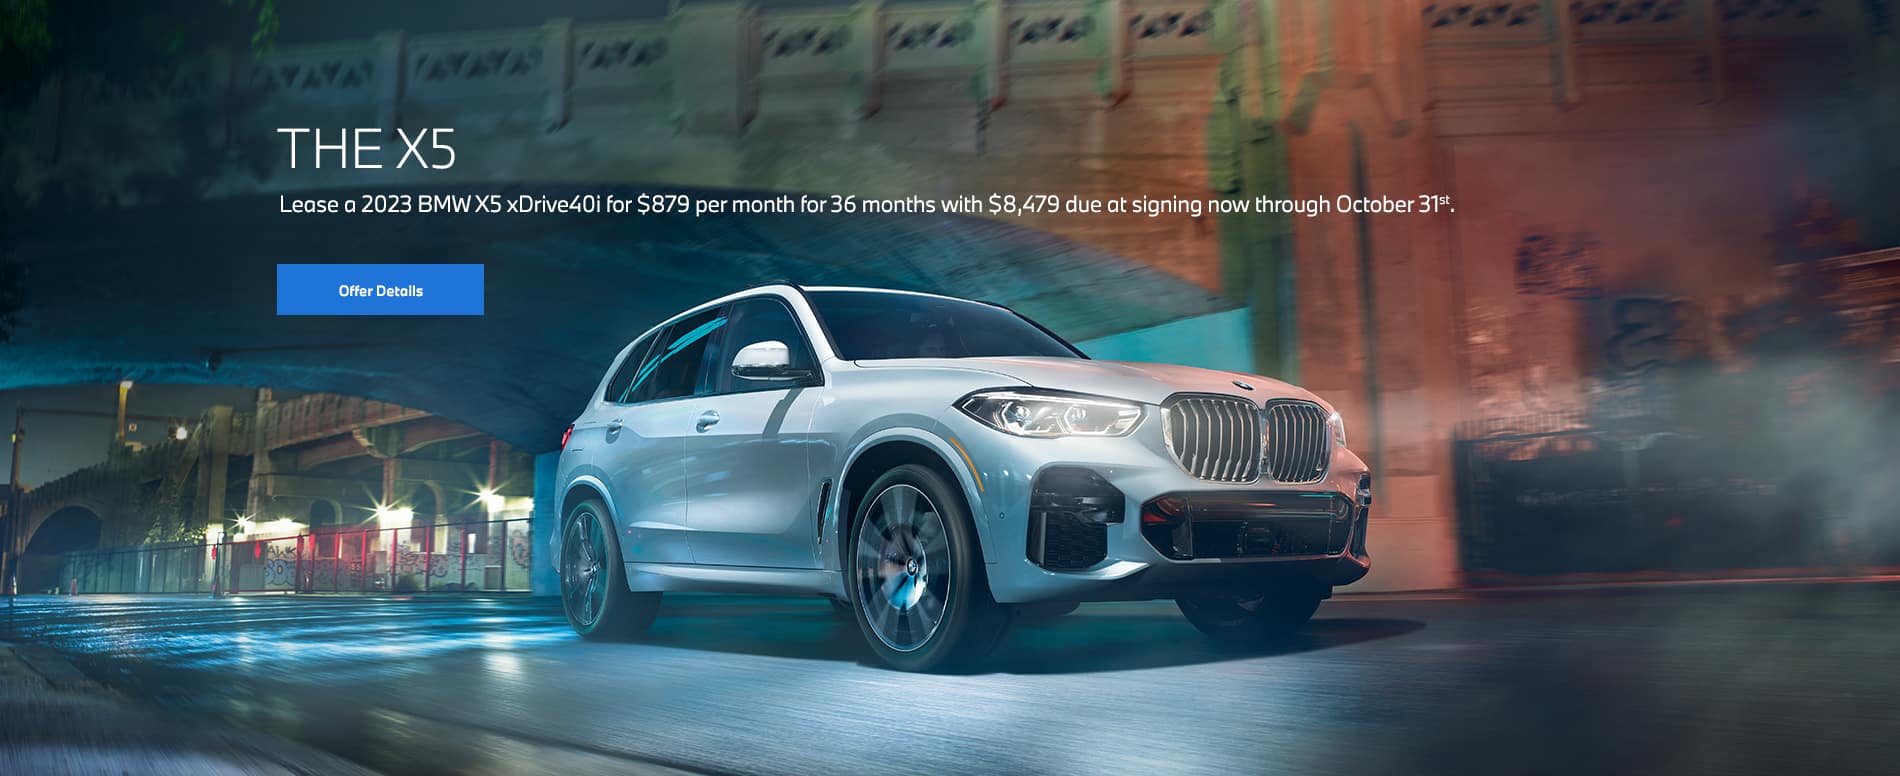 Lease a 2023 BMW X5 for $879 on select models now through October 31st.